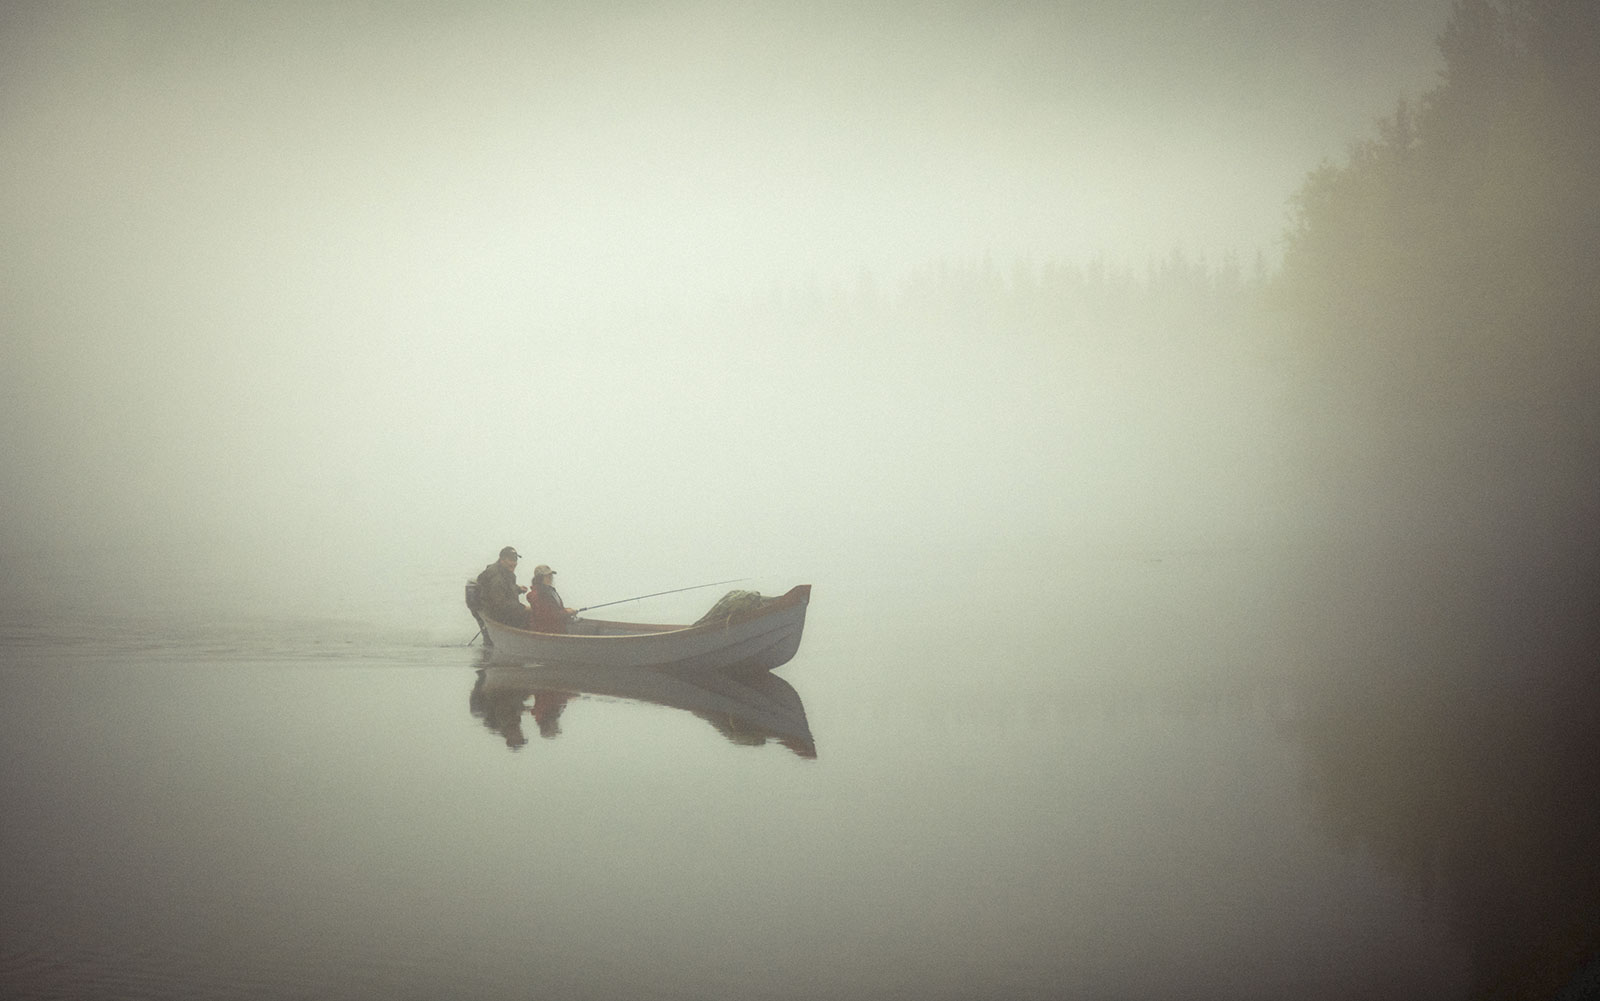 Two fishermen occupy a lone small boat on a misty morning